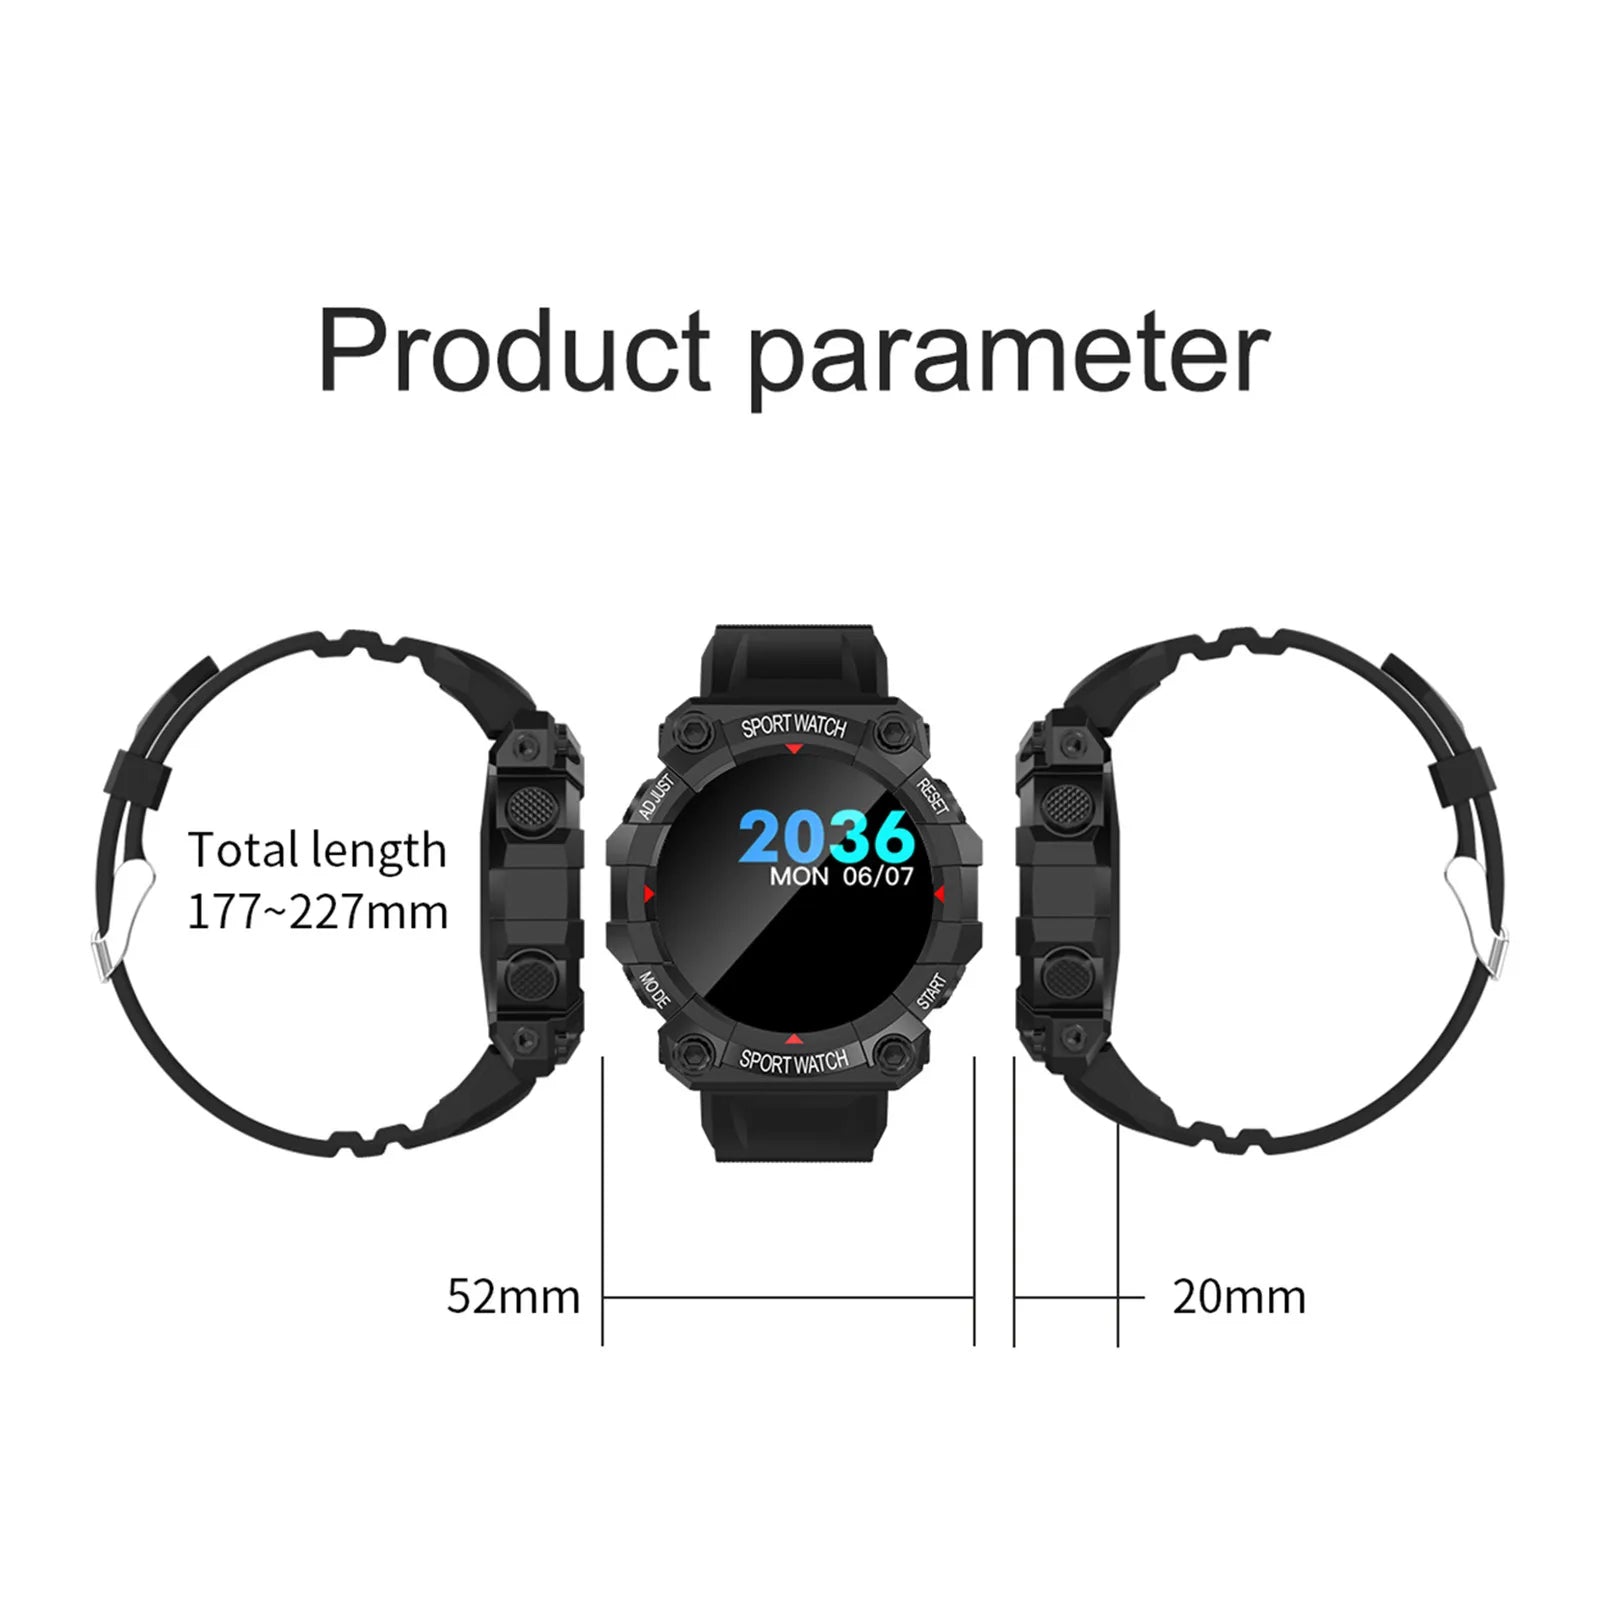 FD68S New Smart Watch Men Women Bluetooth Smartwatch Touch Smart Bracelet Fitness Bracelet Connected Watches for IOS Android